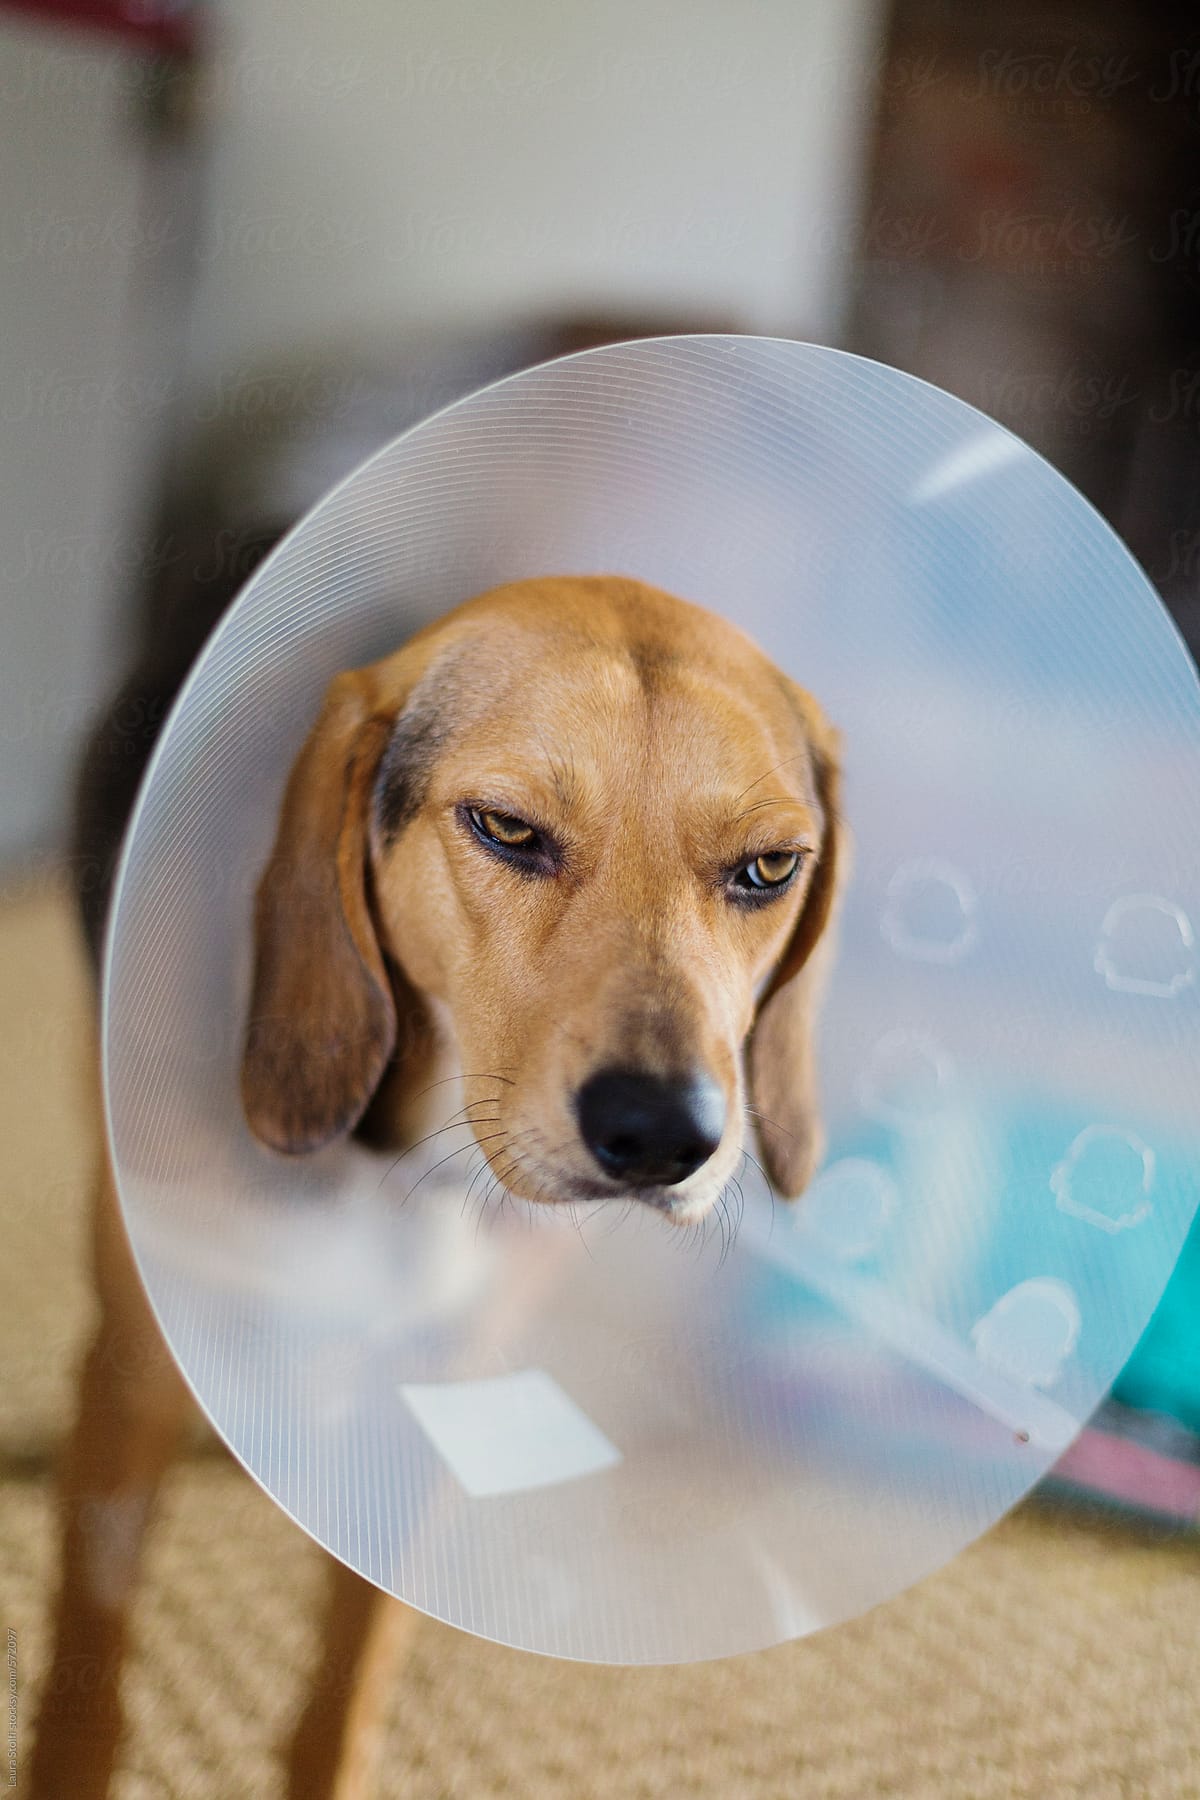 Dog looks really annoyed while wearing e-collar medical device